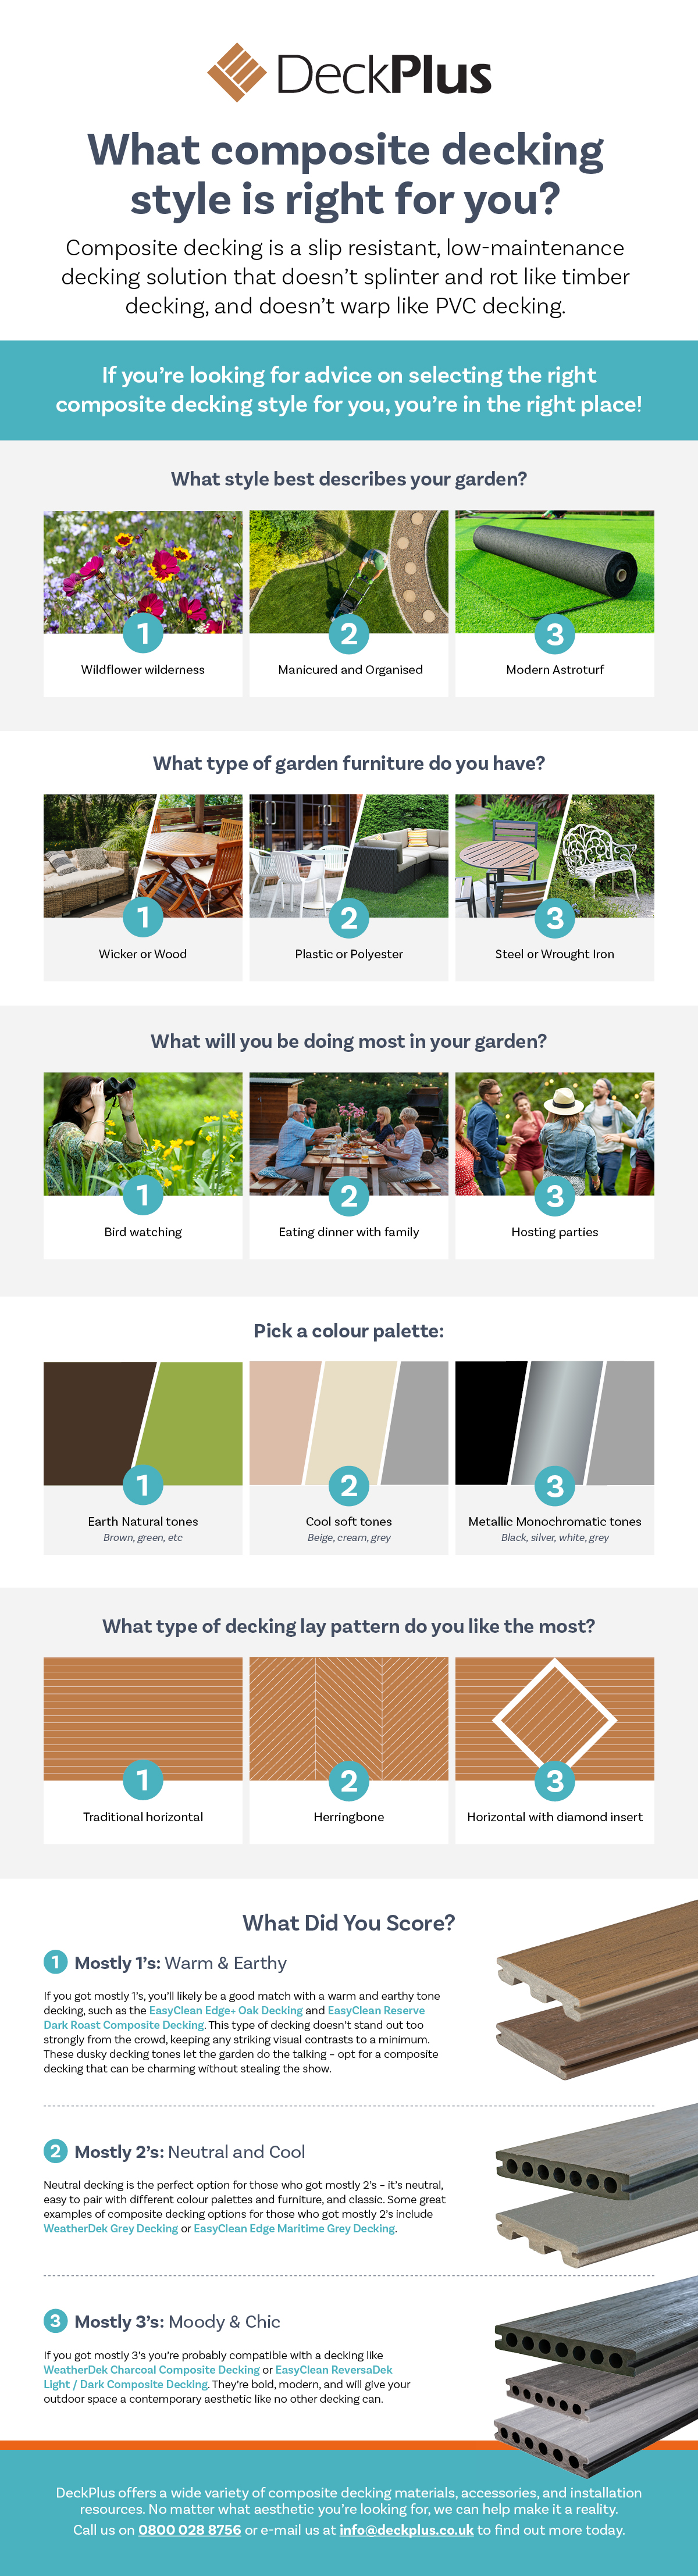 what composite decking style is right for you quiz infographic